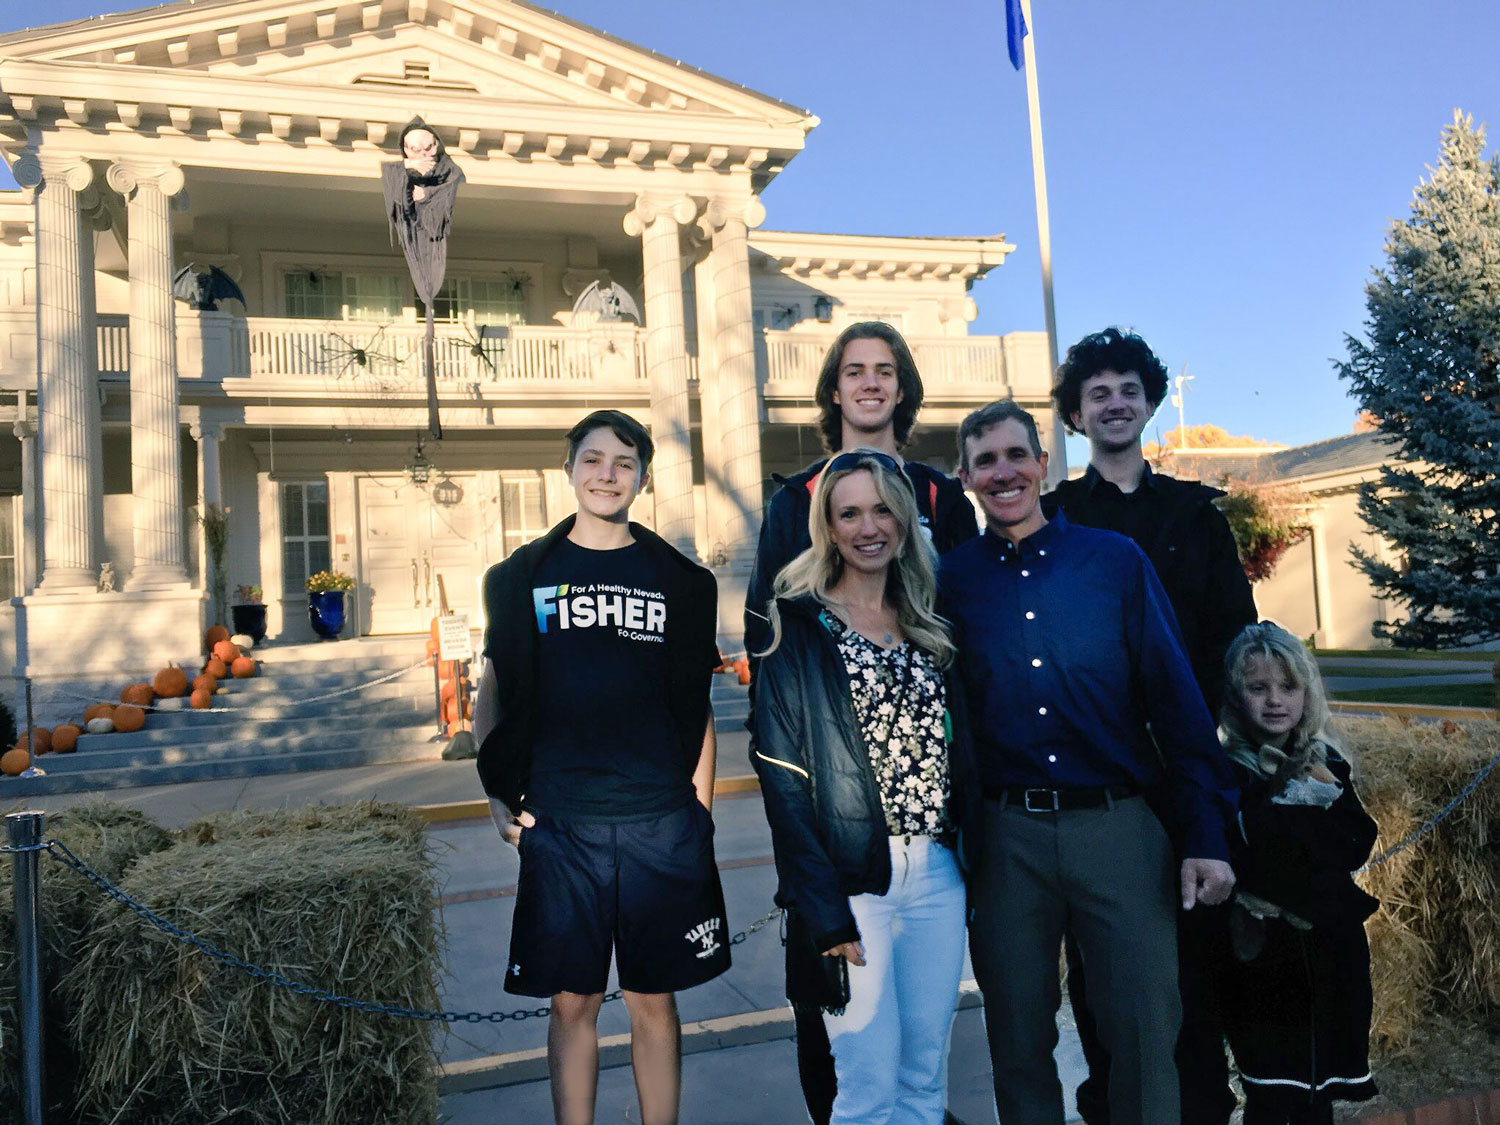 The Fisher Family in front of the governor's mansion